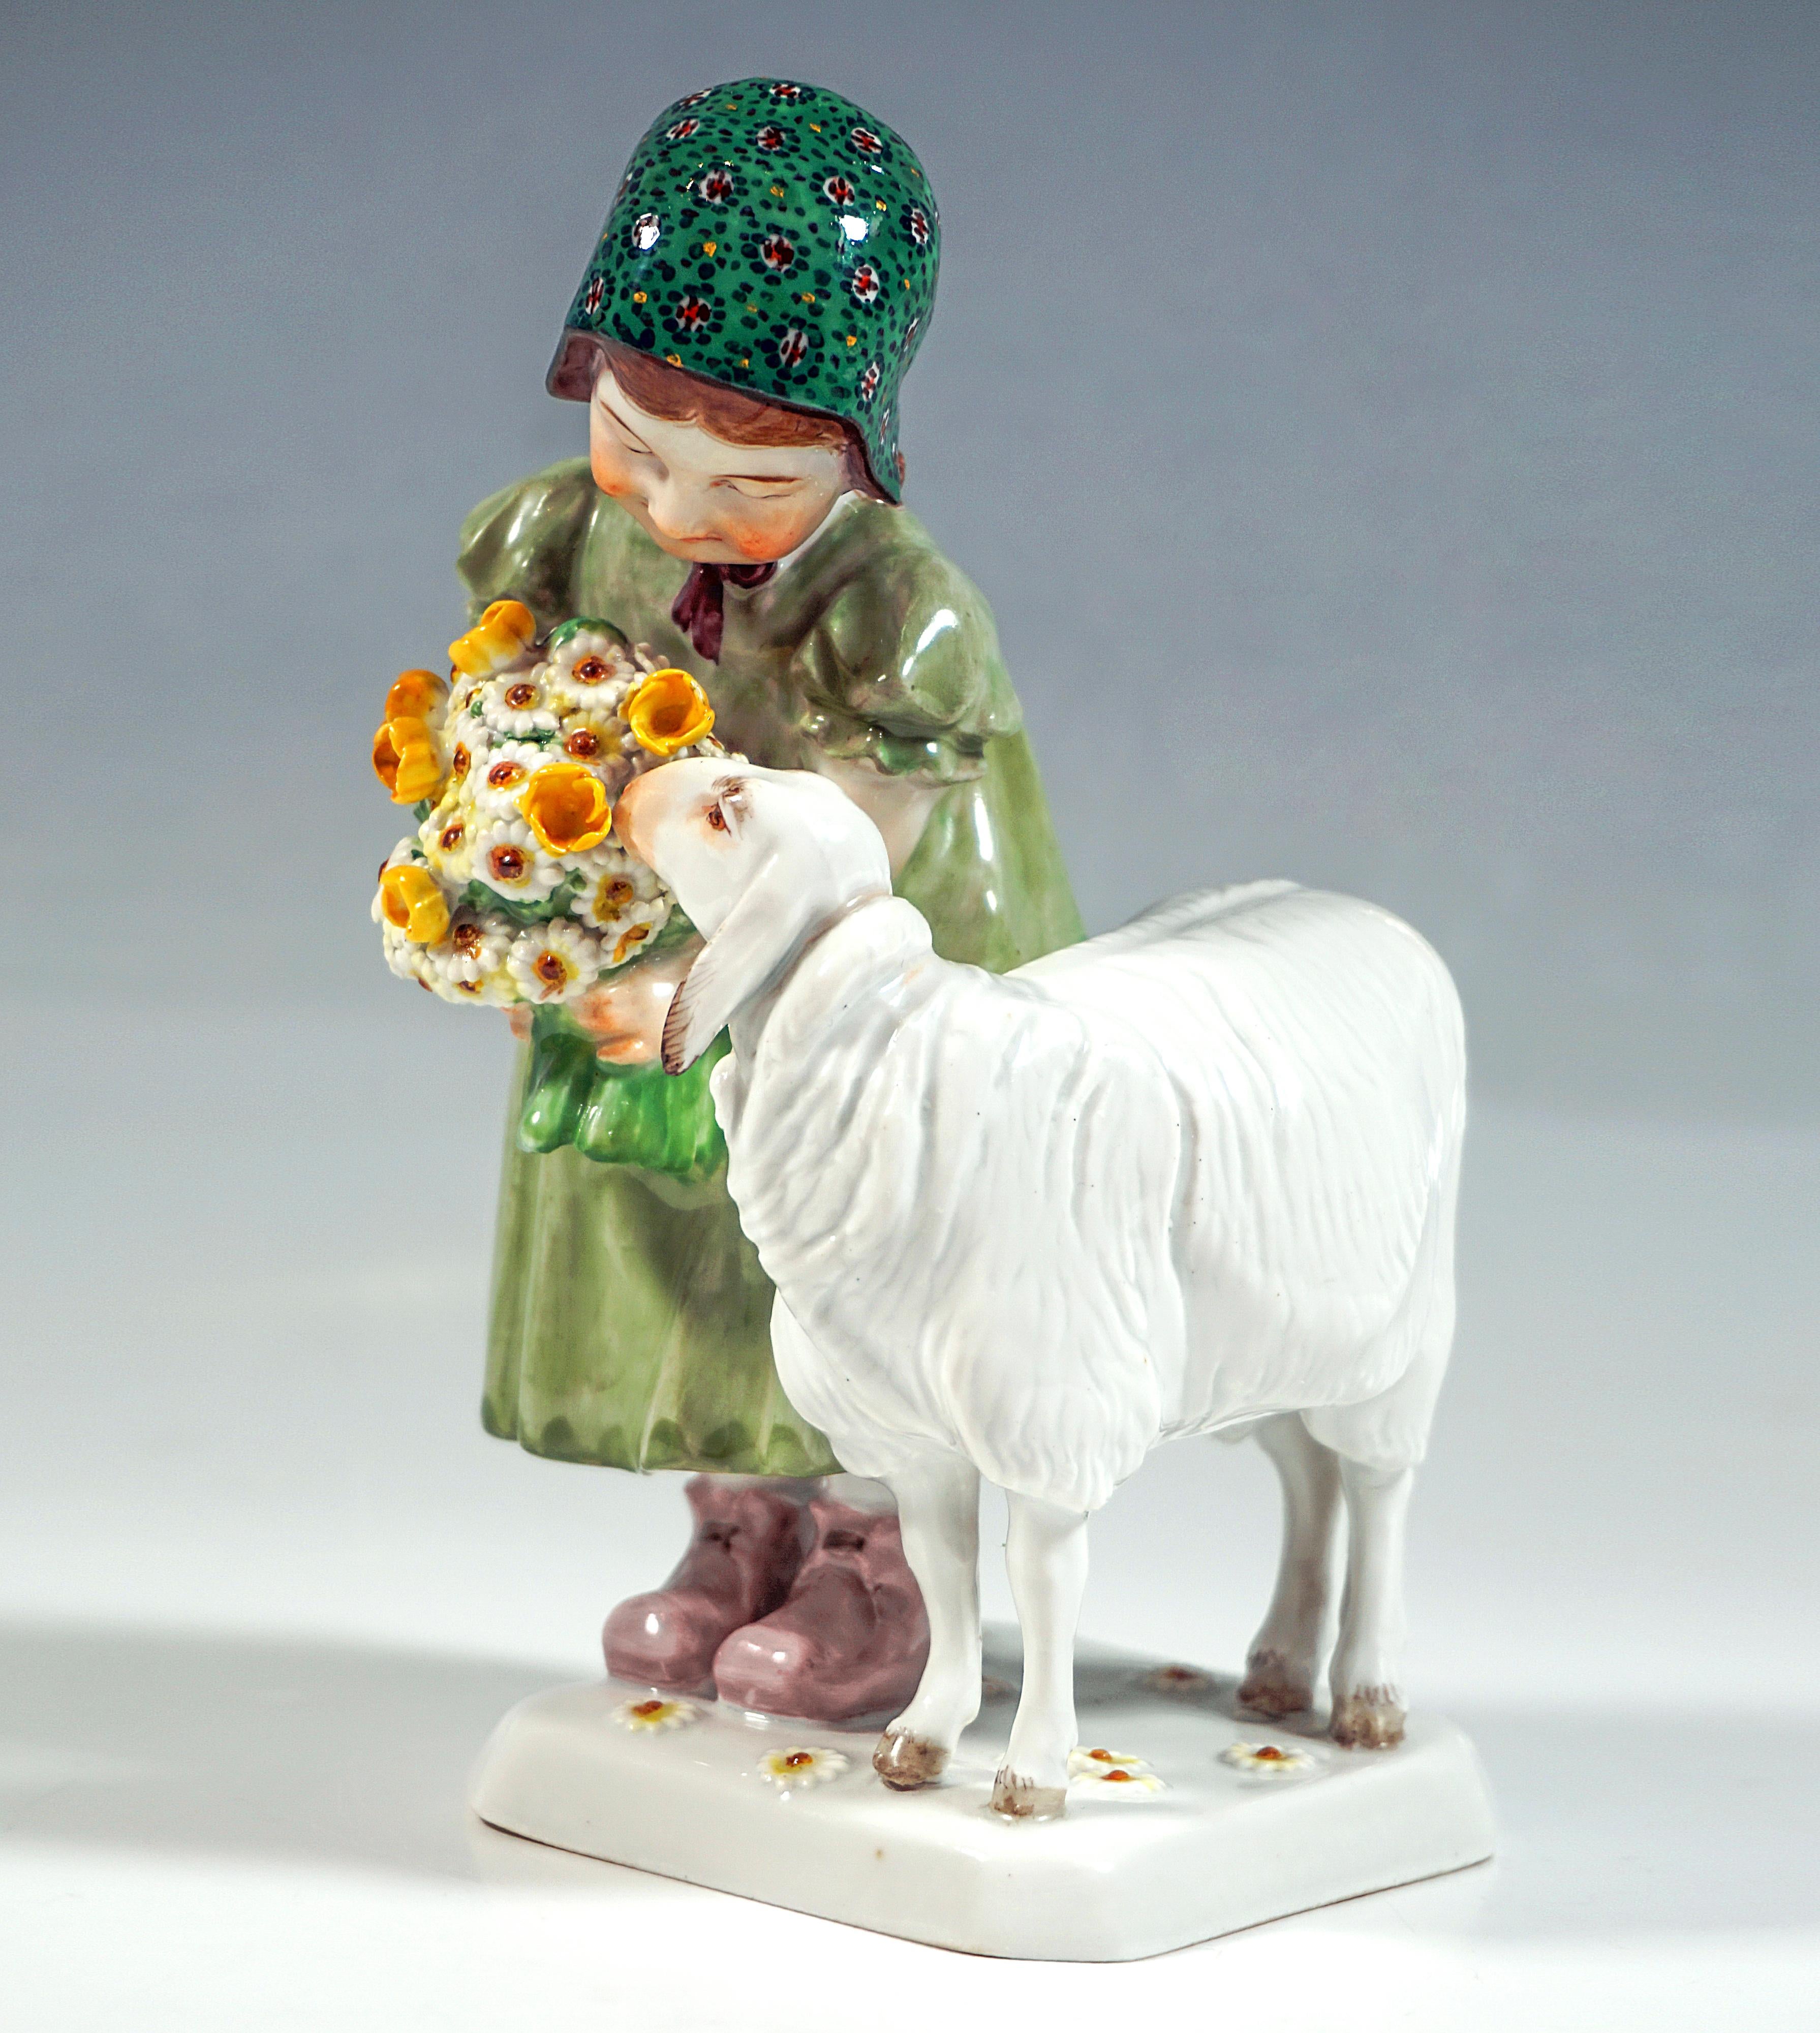 Very loving Art Nouveau Child Figure Group:
Girl in green dress and patterned cap holding a bouquet of flowers with both hands and leaning down to the sheep sniffing the flowers.
White square base with beveled corners and daisy decoration in